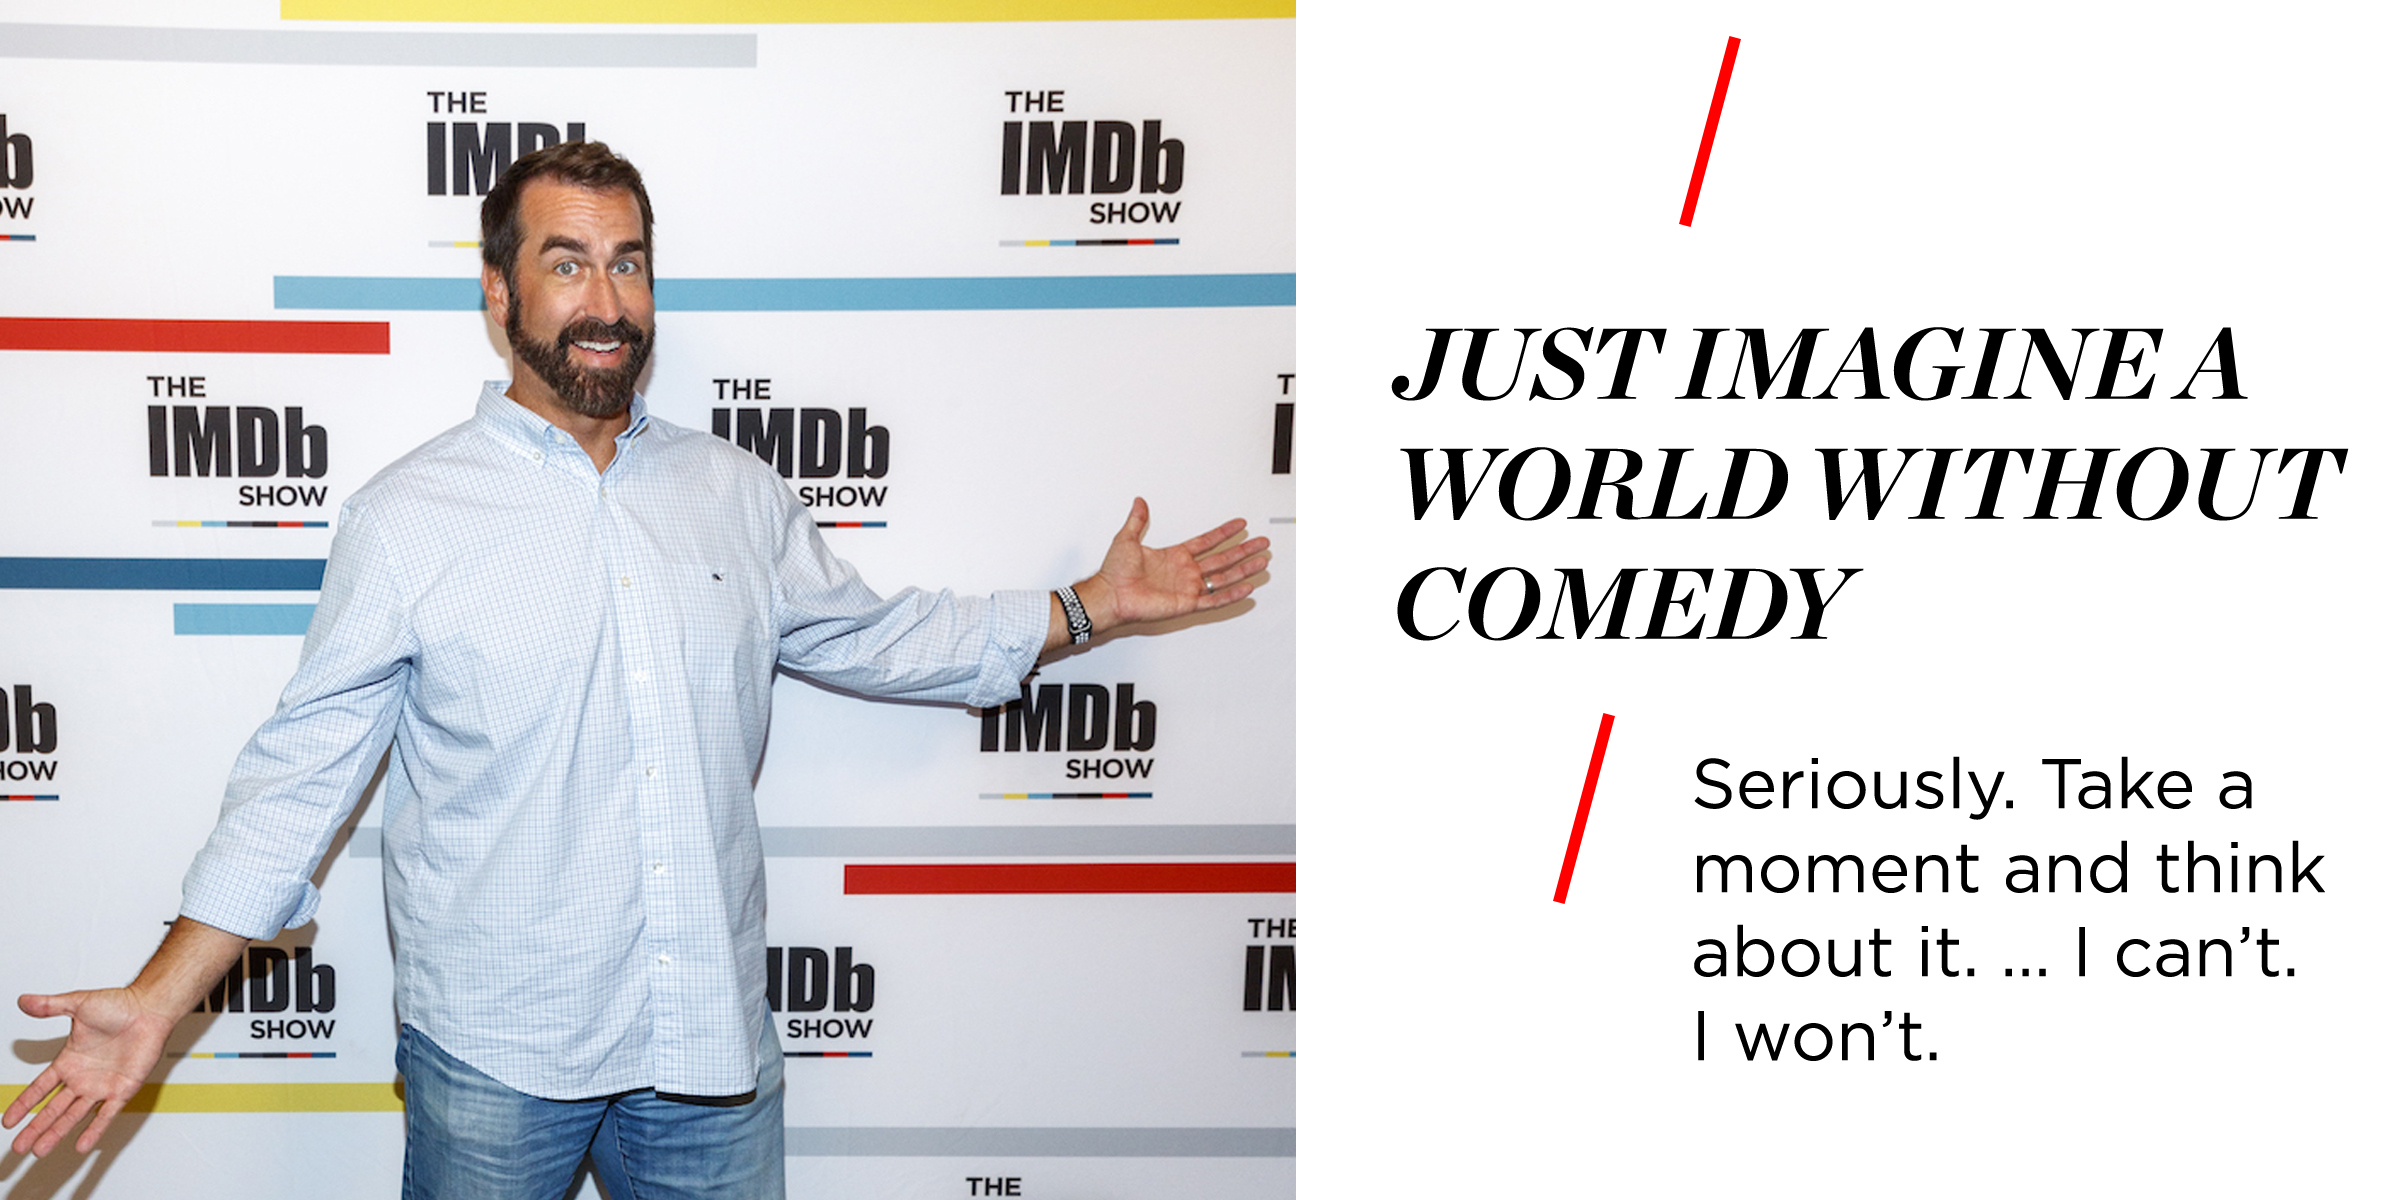 Just imagine a world without comedy. Seriously. Take a moment and think about it. … I can’t. I won’t.